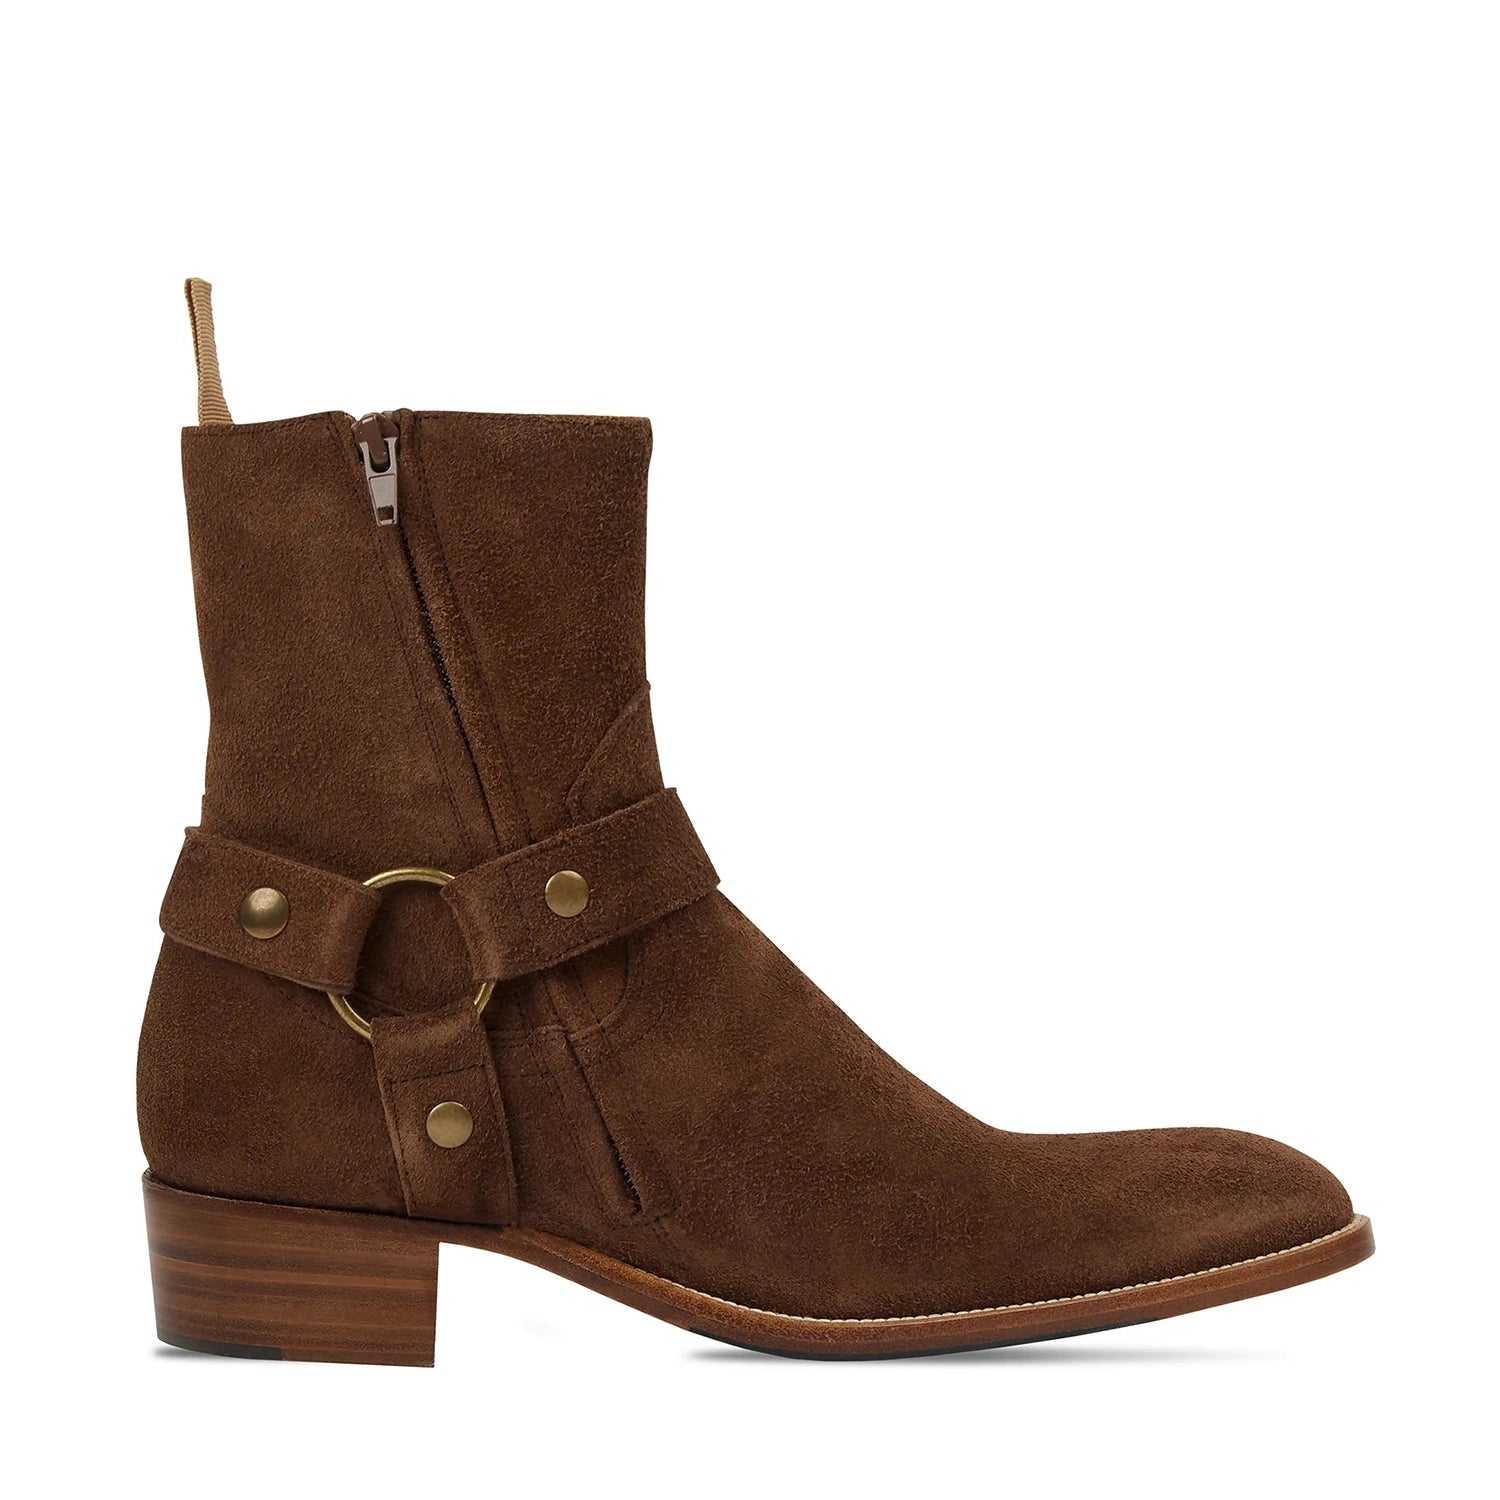 Harness Zip Boot - Nut Suede Leather